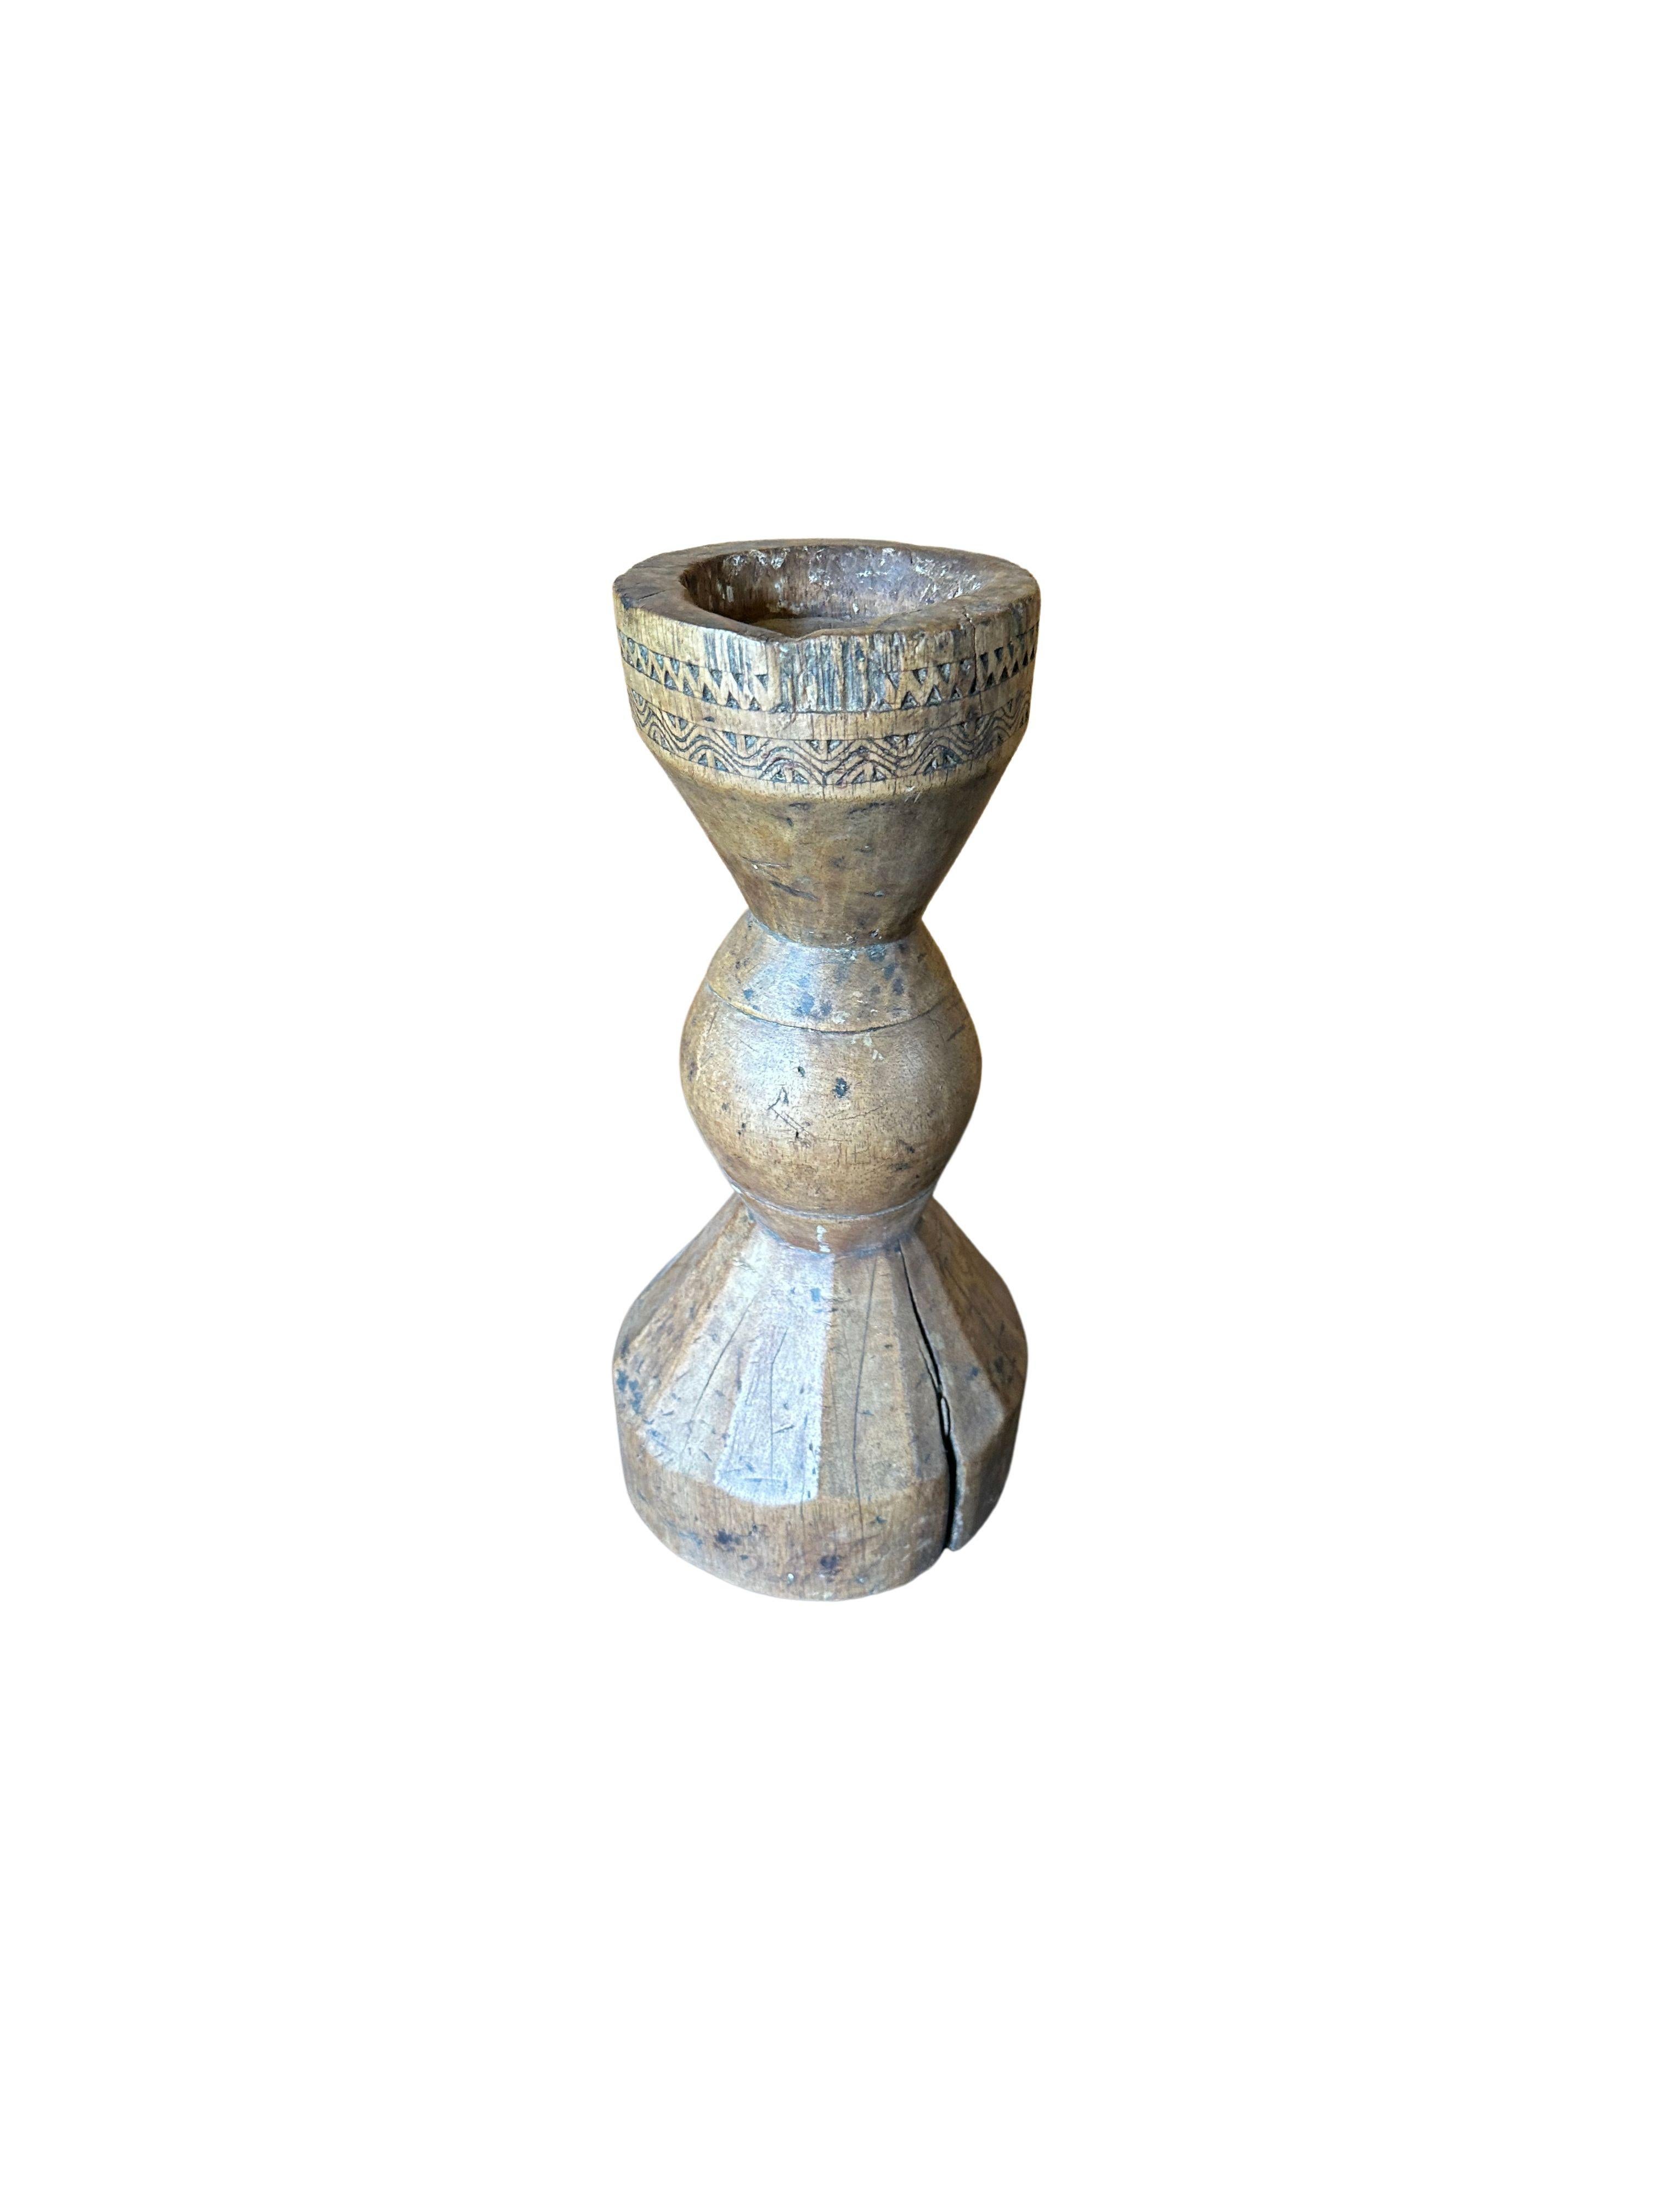 Vintage Wood Candle Holder with Carved Detailing, Java, c. 1950 In Good Condition For Sale In Jimbaran, Bali